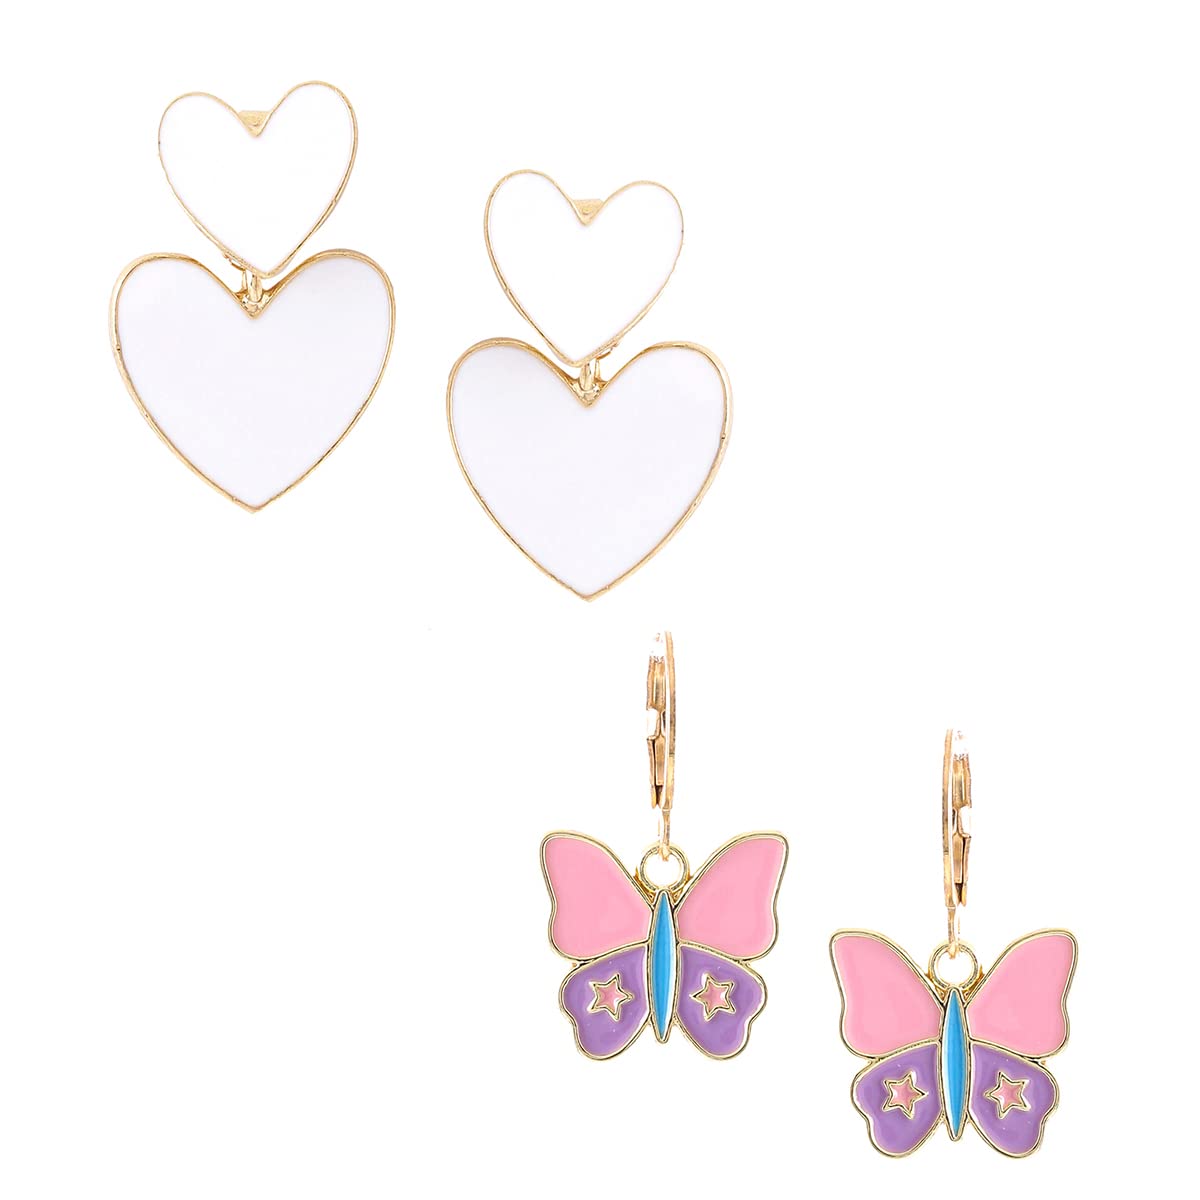 Yellow Chimes Earring For Women Combo Of 2 Pcs Gold Tone Huggie Hoop With Butterfly Charm and White Color Double Heart Drop Earrings For Women and Girls